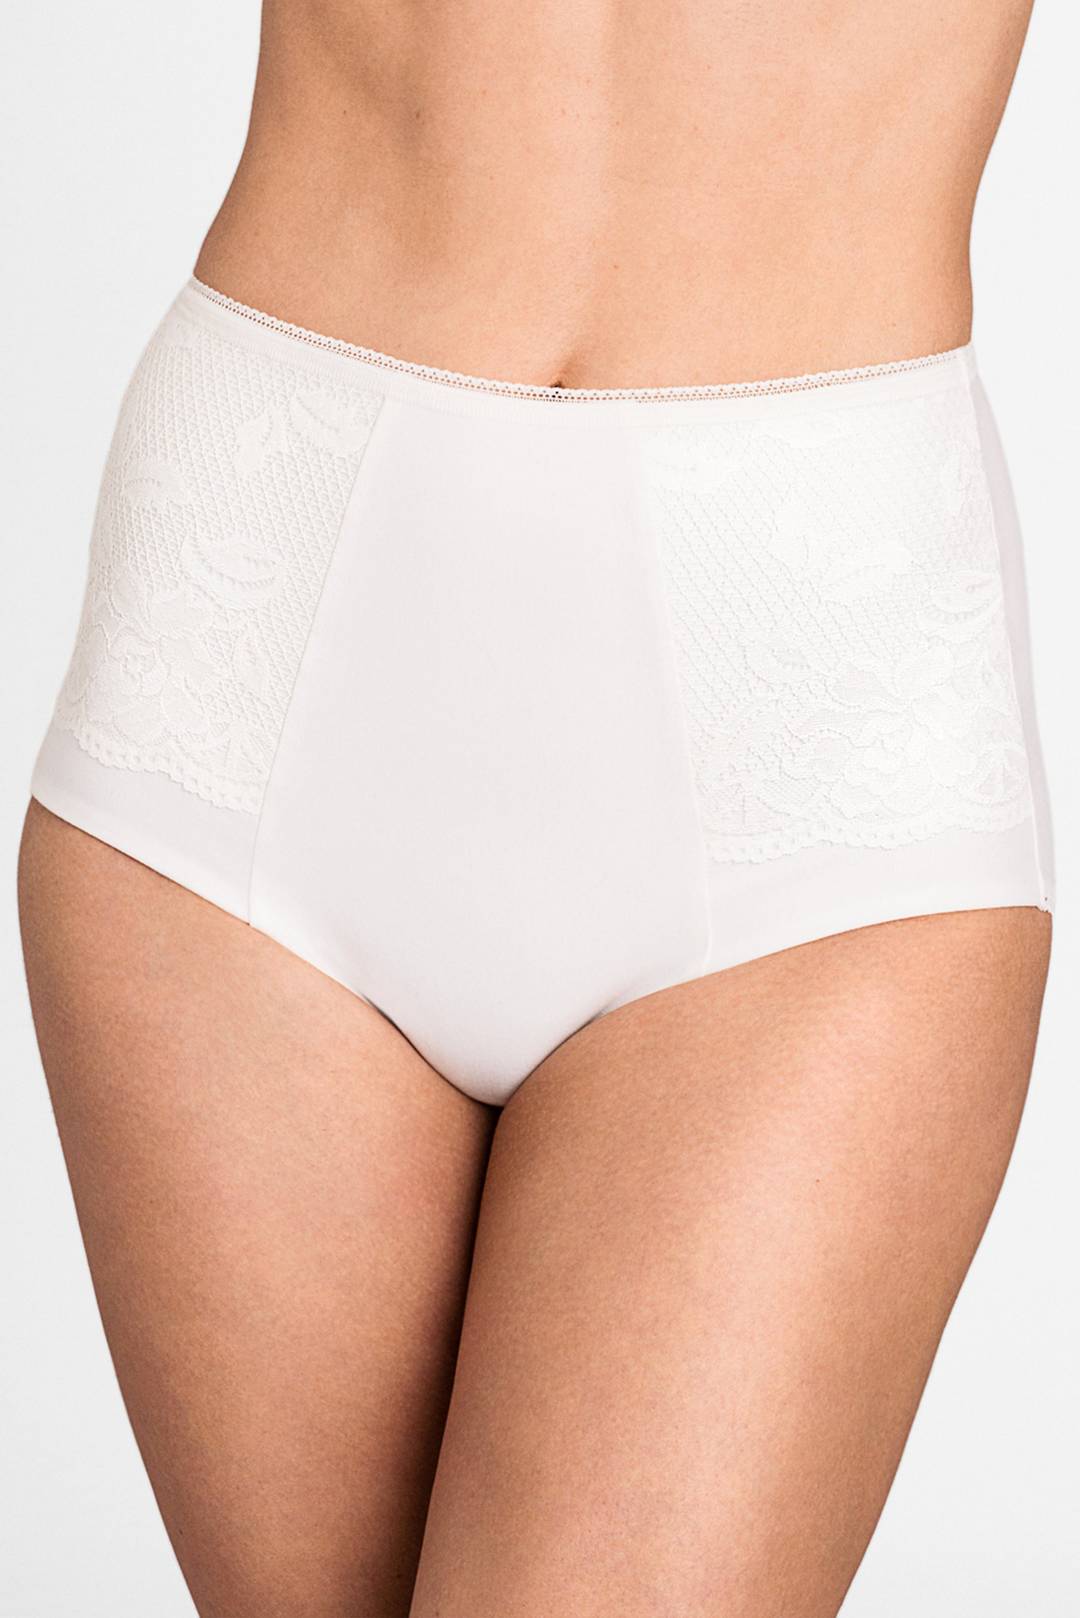 Lovely Lace panty - A good and stable fit that is perfect for everyday wear  - Miss Mary